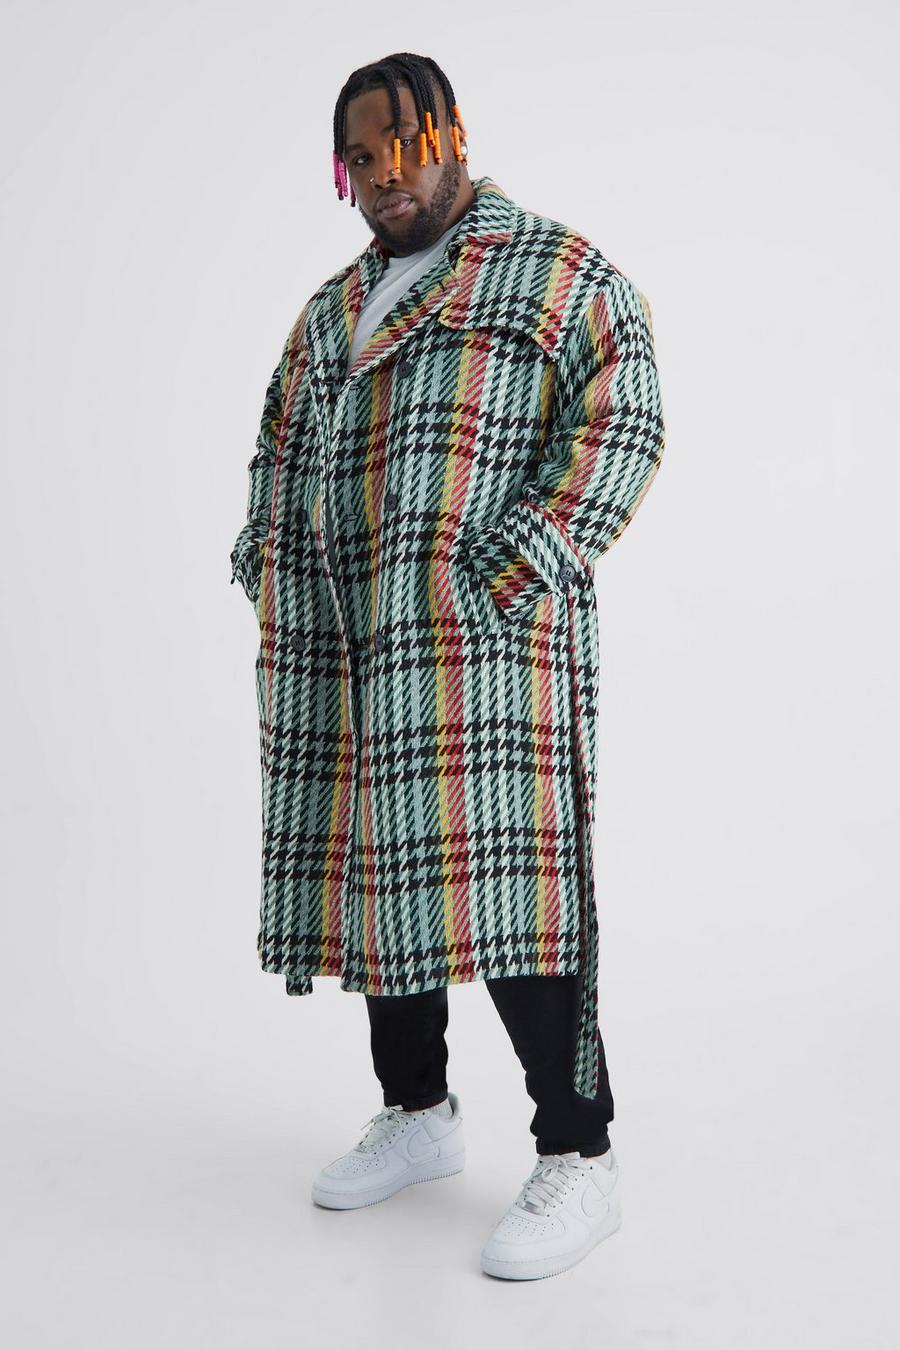 New Look Grid Check Coat /Winter Outerwear Coat Size 0 / XS